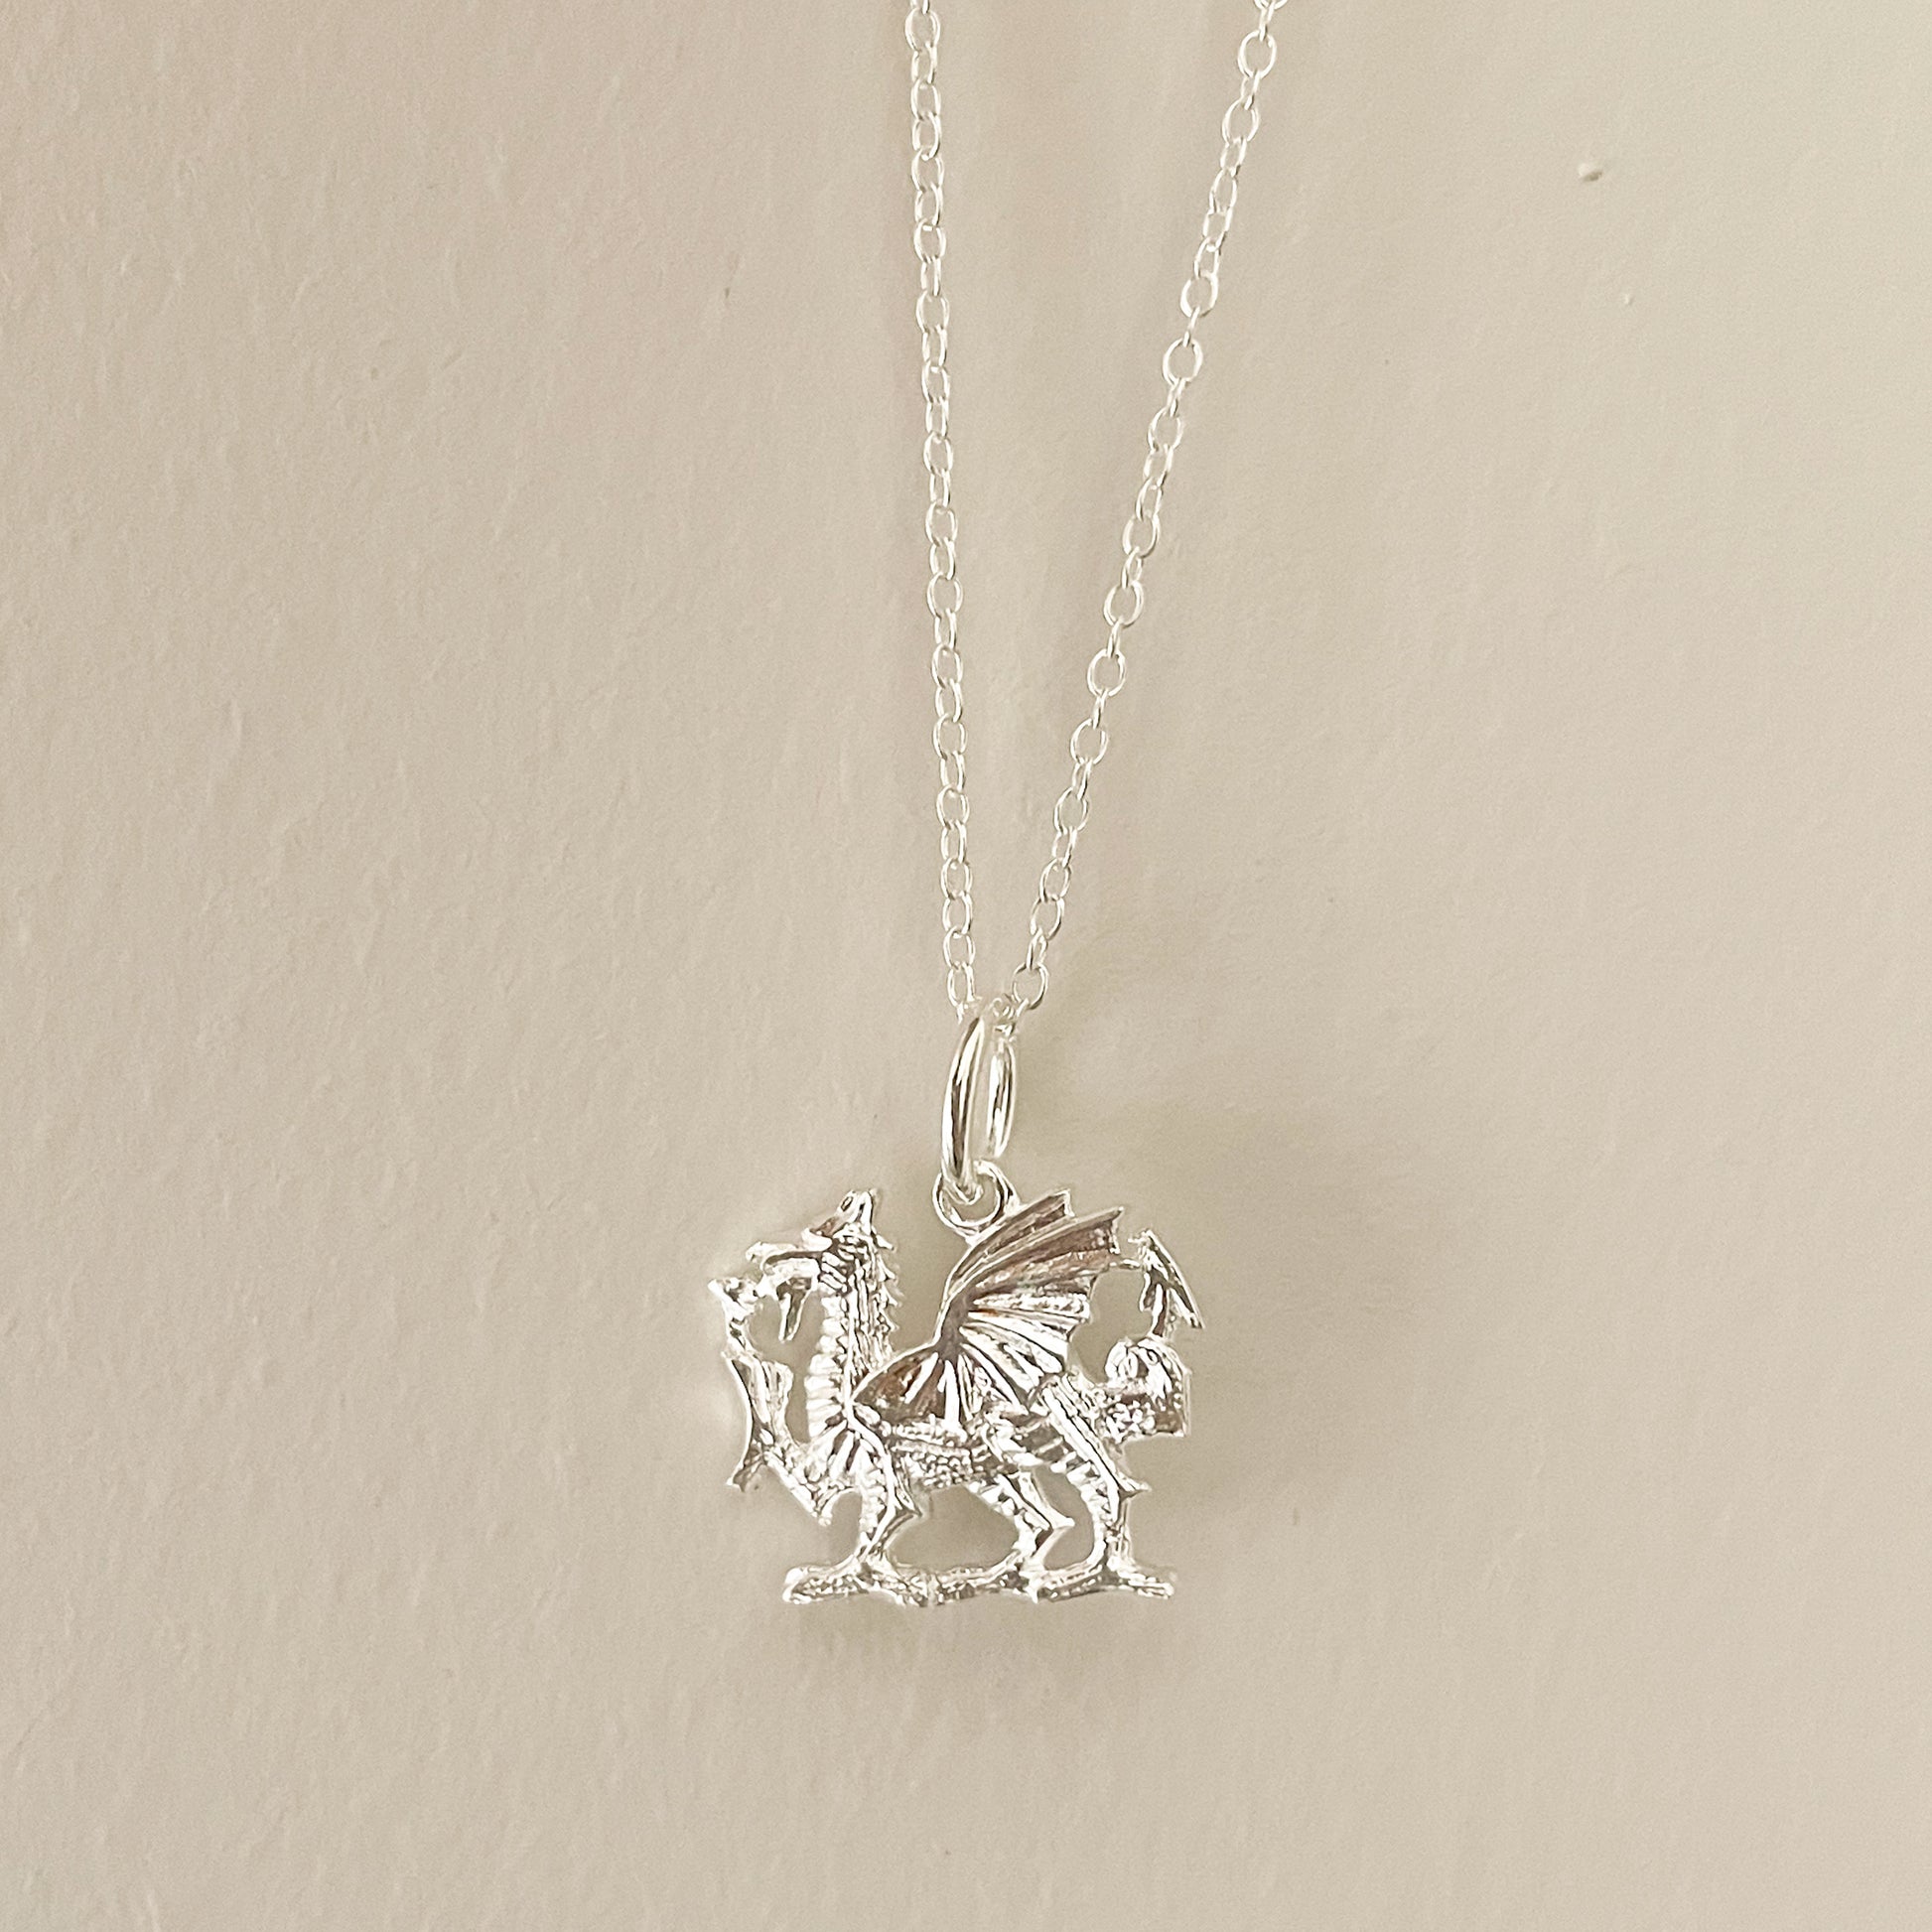 Necklace - Sterling Silver - Welsh Dragon - 16" Chain